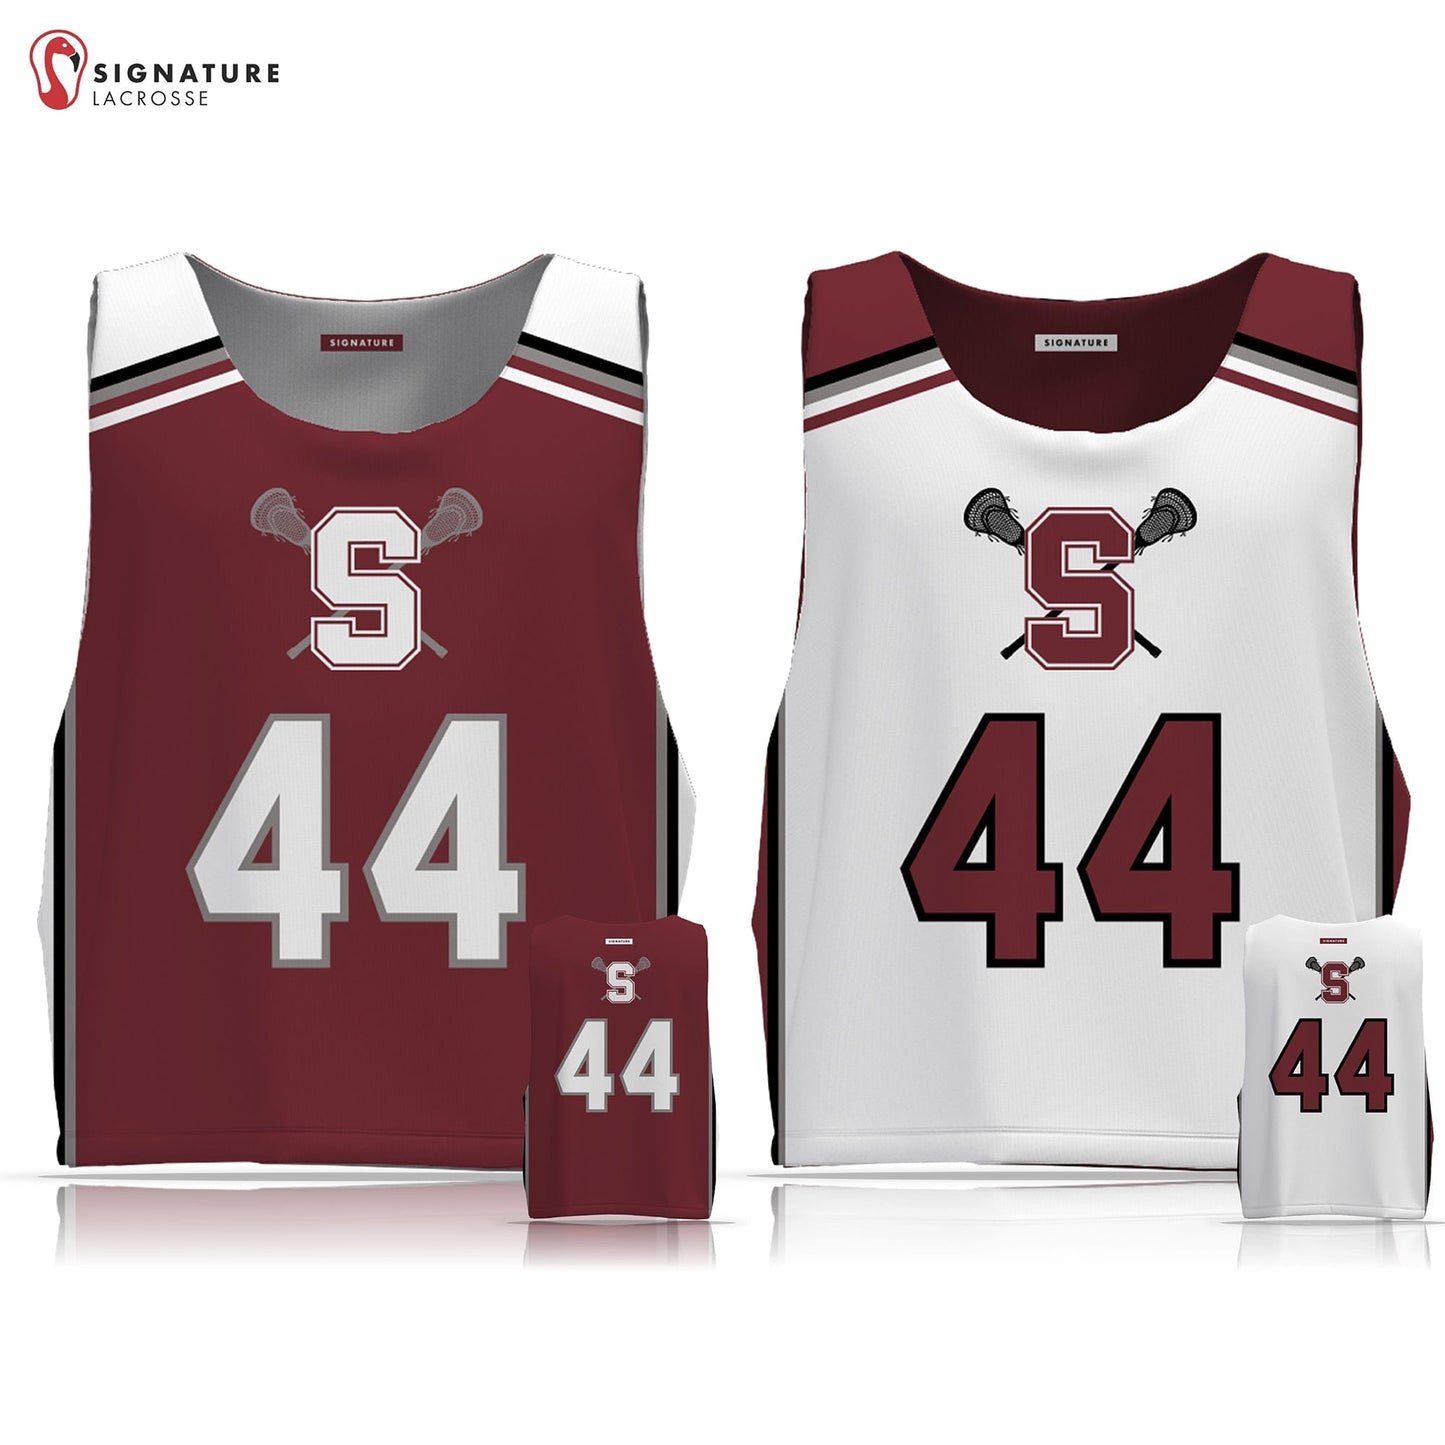 State College Men's Player Reversible Game Pinnie: 7-8 Signature Lacrosse